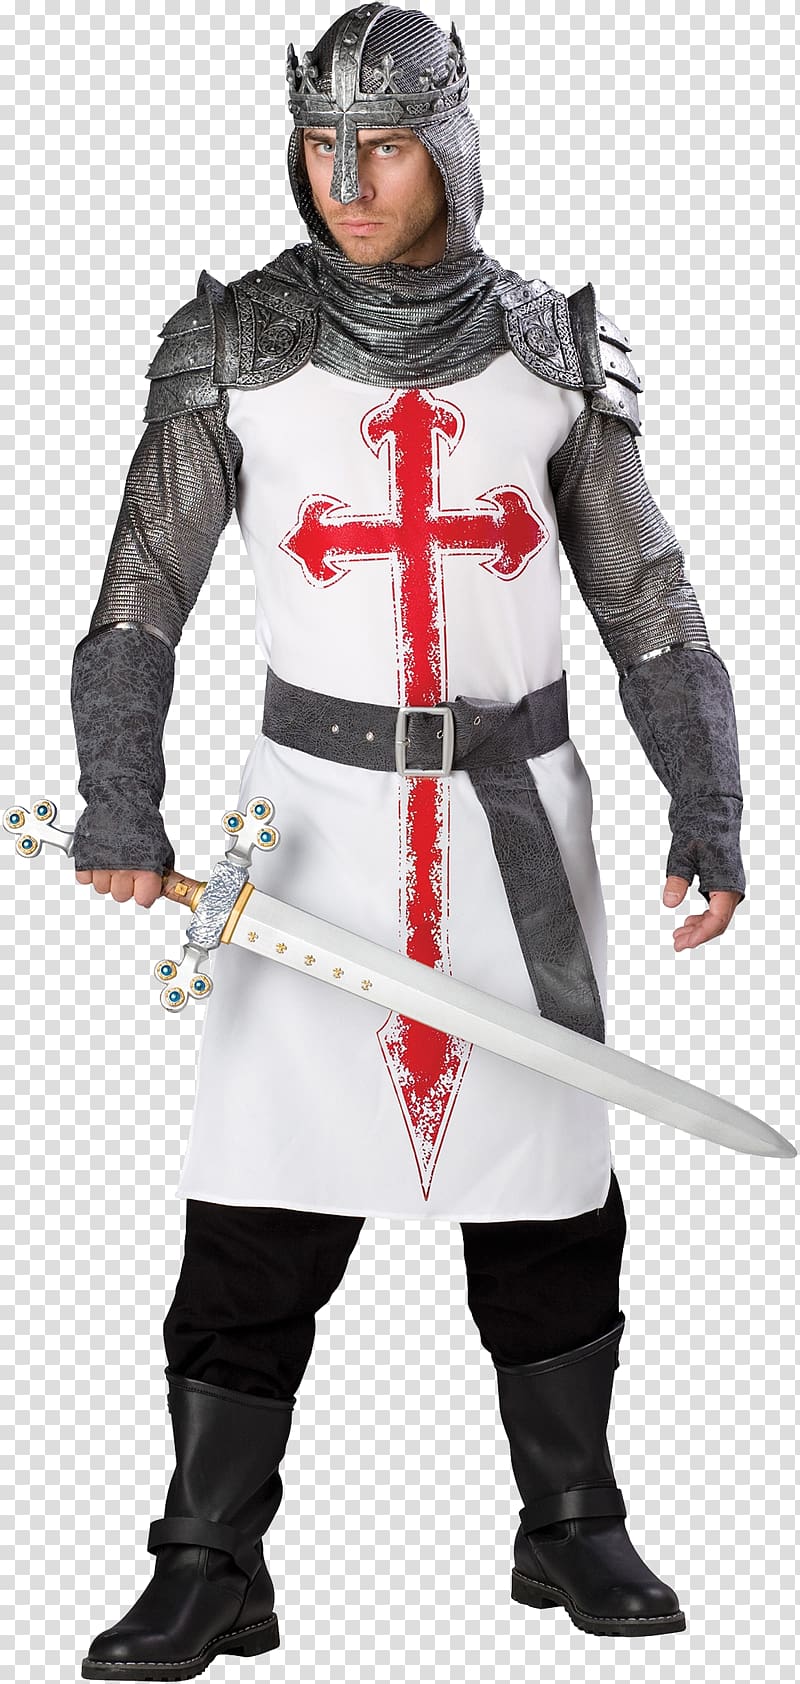 Crusades BuyCostumes.com Knight Clothing, medival knight transparent background PNG clipart